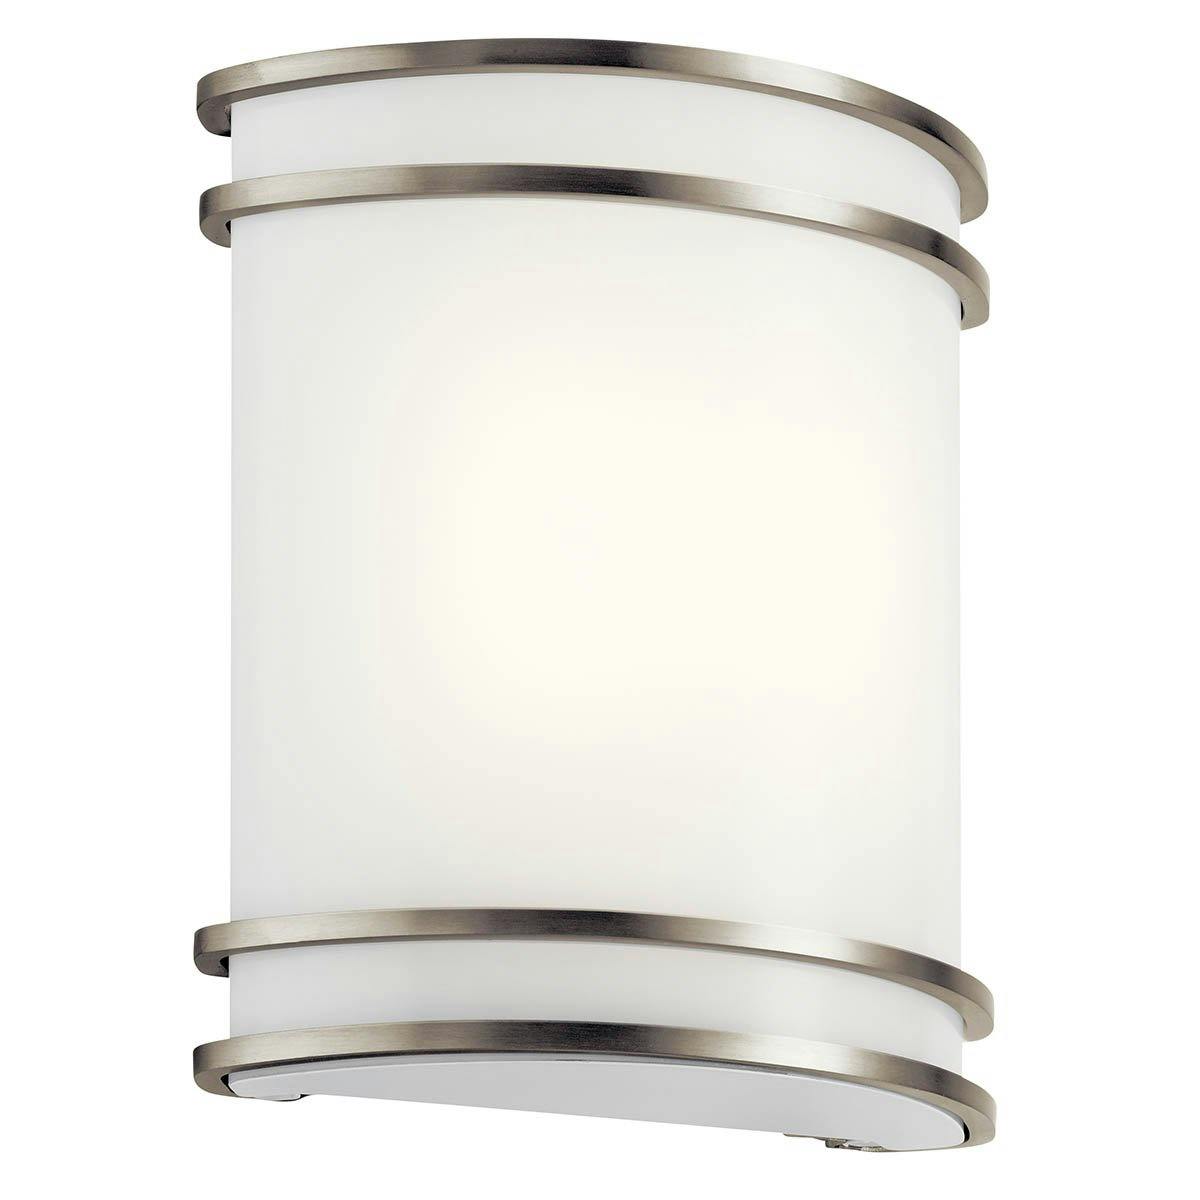 1 Light LED Wall Sconce Brushed Nickel on a white background